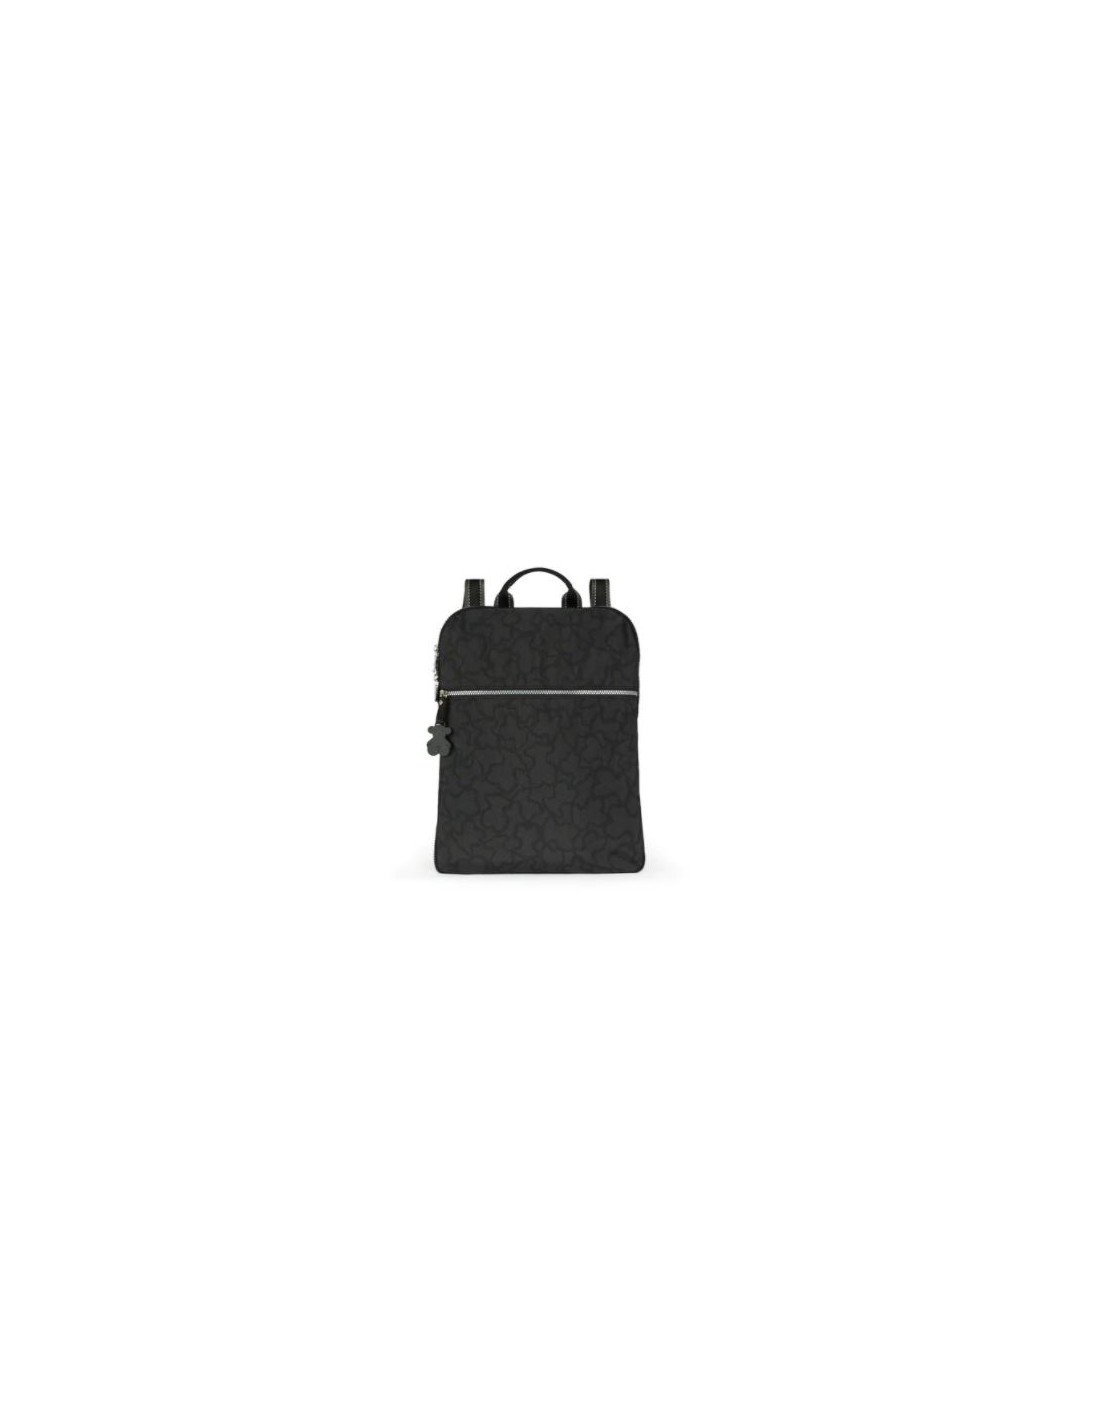 Tous Kaos New Colores Backpack In Anthracite-Black Nylon, latest offers on  Tous Moda fashion accessories